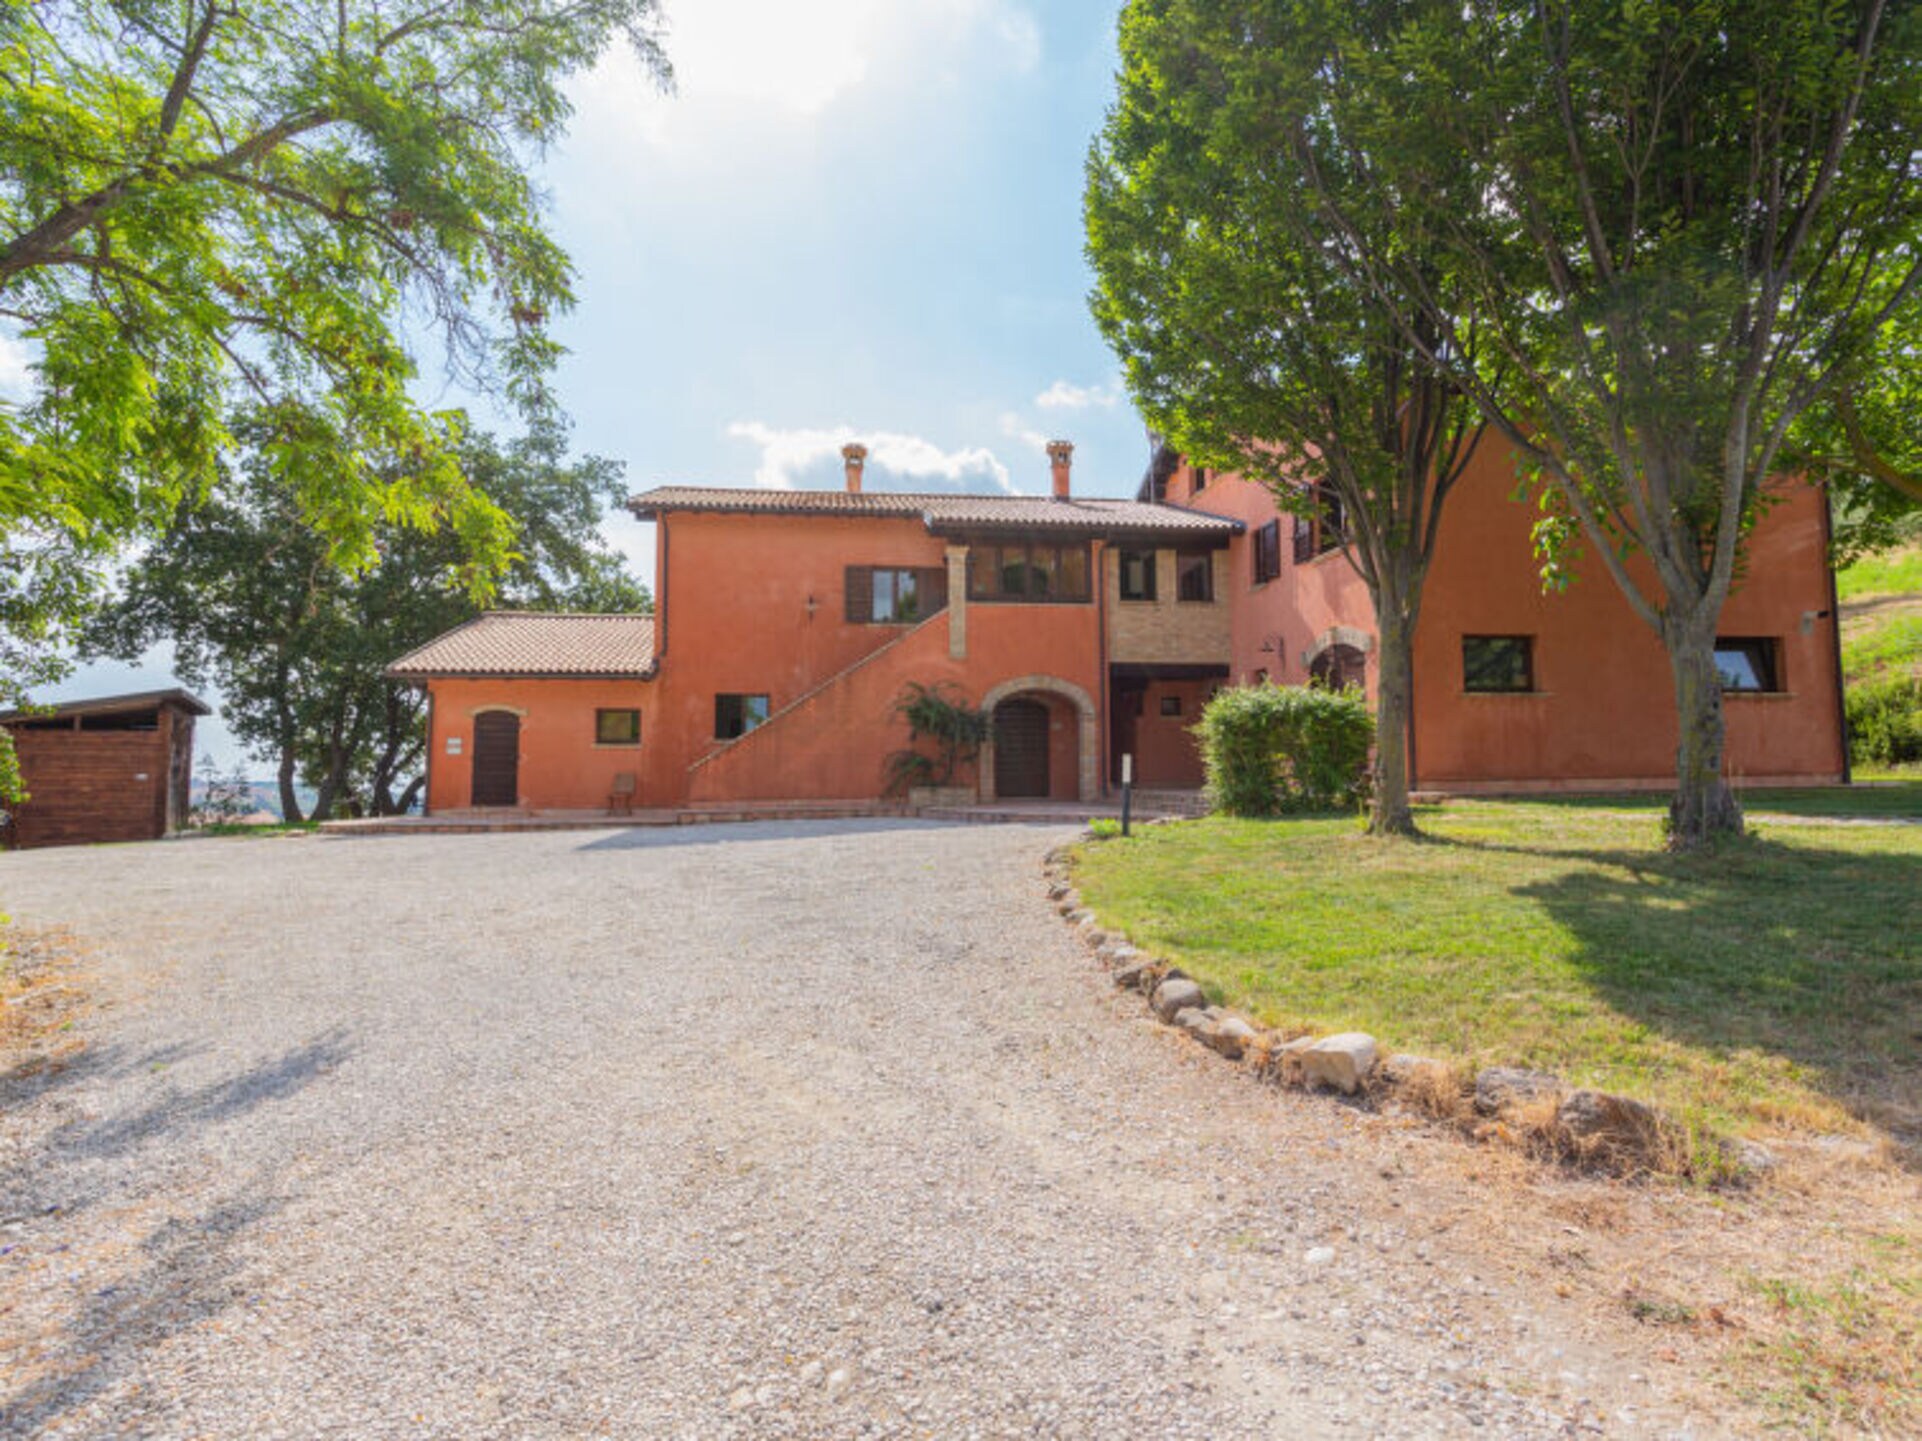 Property Image 2 - Property Manager Villa with First Class Amenities, Abruzzo Villa 1007